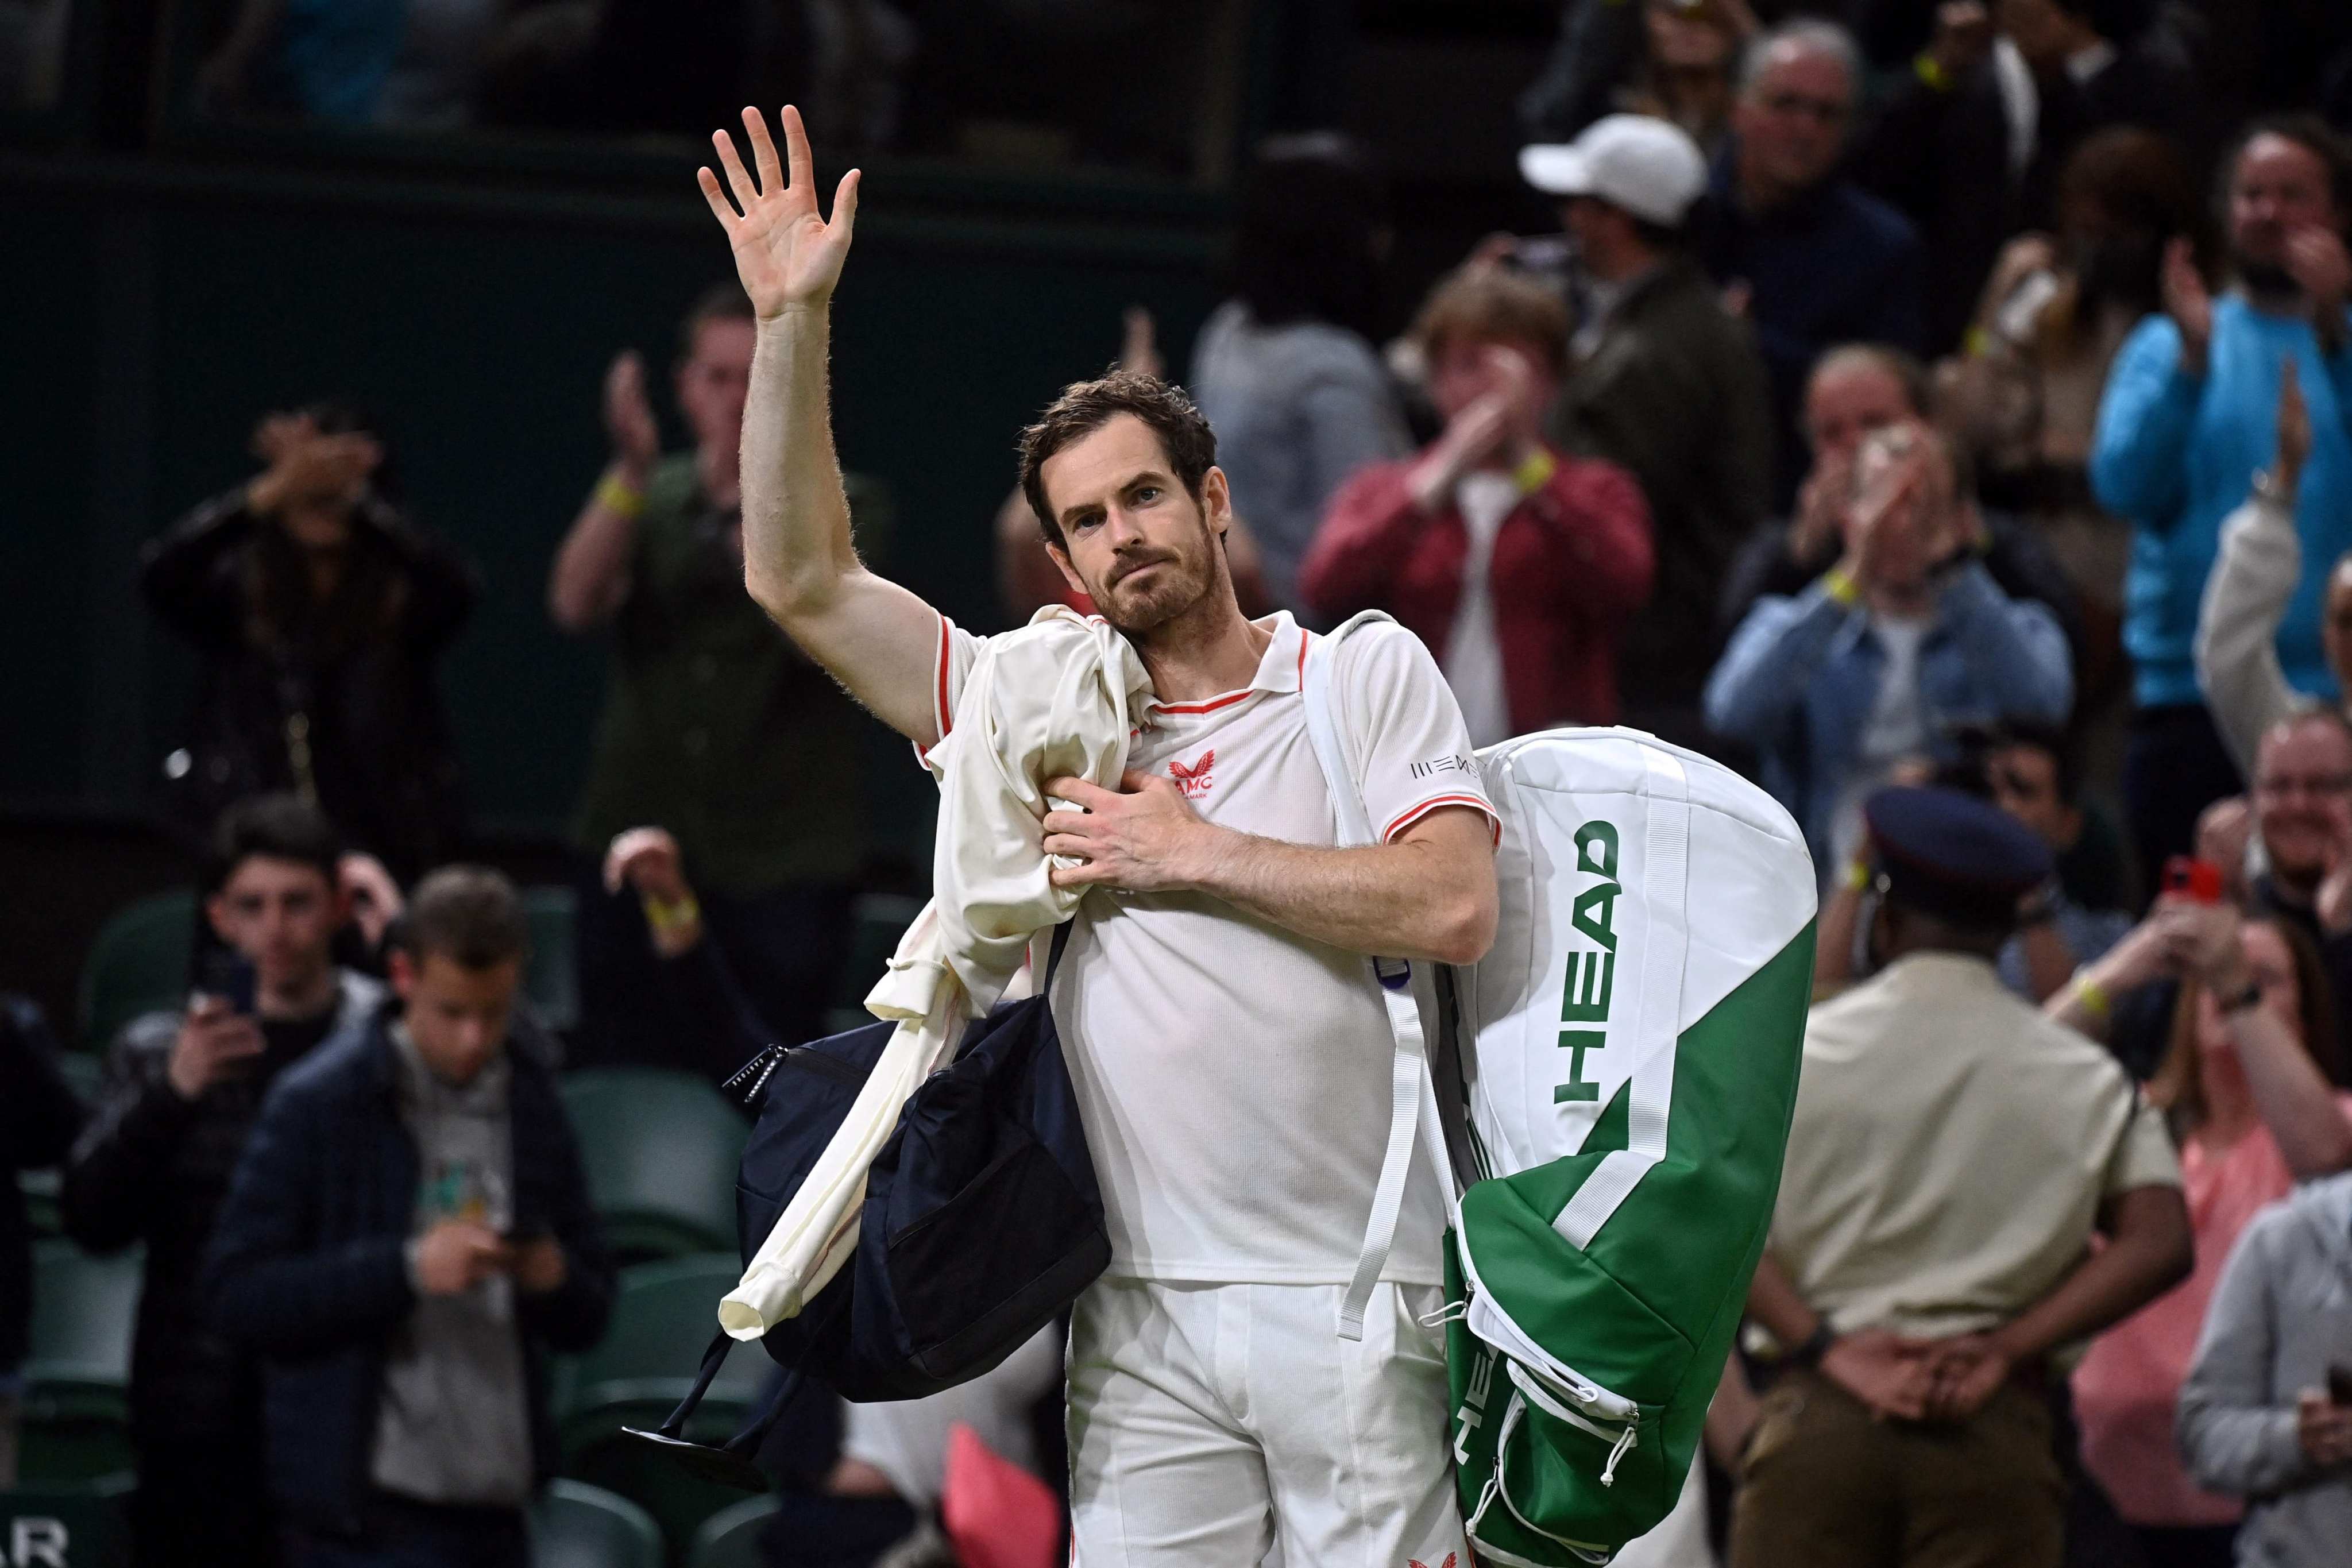 Andy Murray, two-time Wimbledon champion, may miss this year’s tournament after undergoing back surgery. Photo: AFP